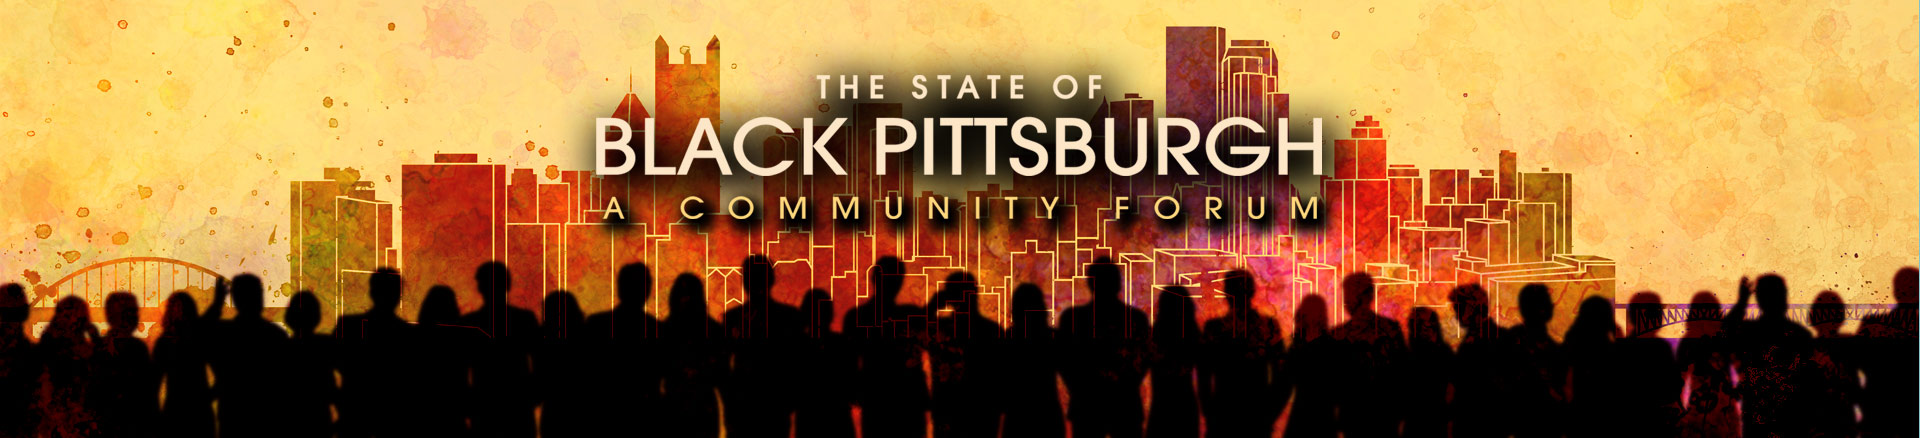 The State of Black Pittsburgh Community Forum banner